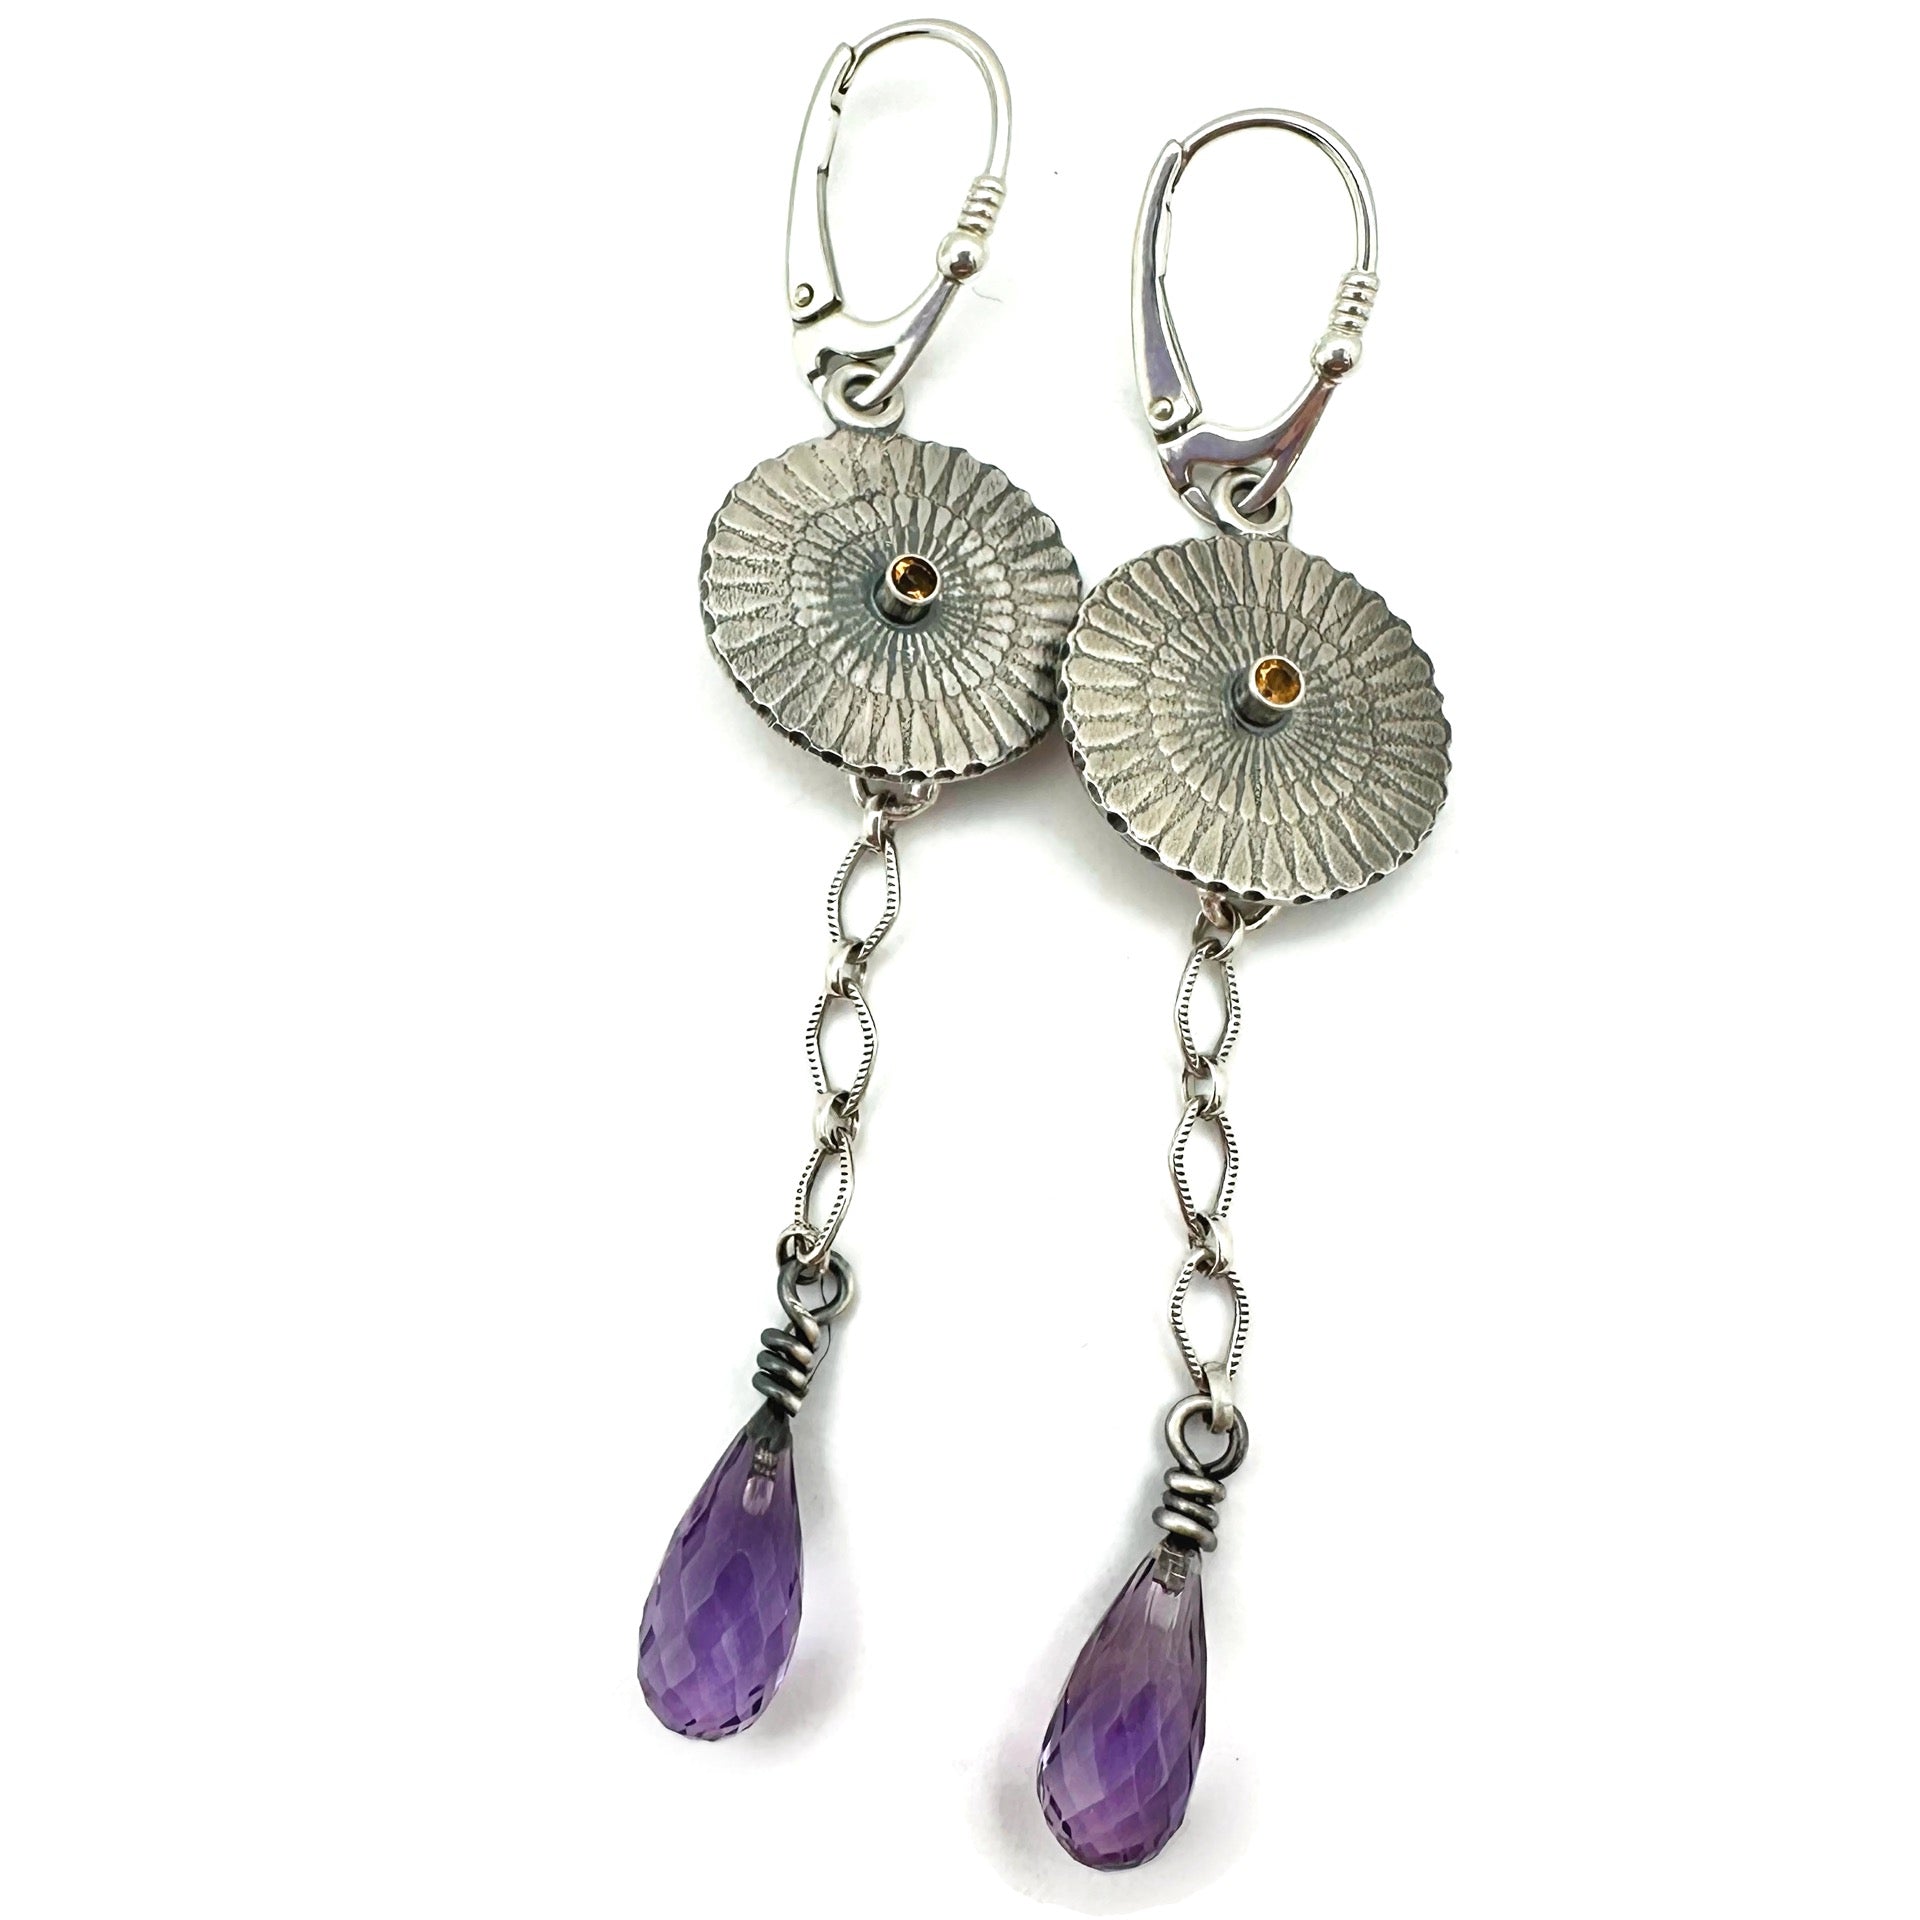 Floral Burst Earrings with Citrine and Amethyst Teardrop